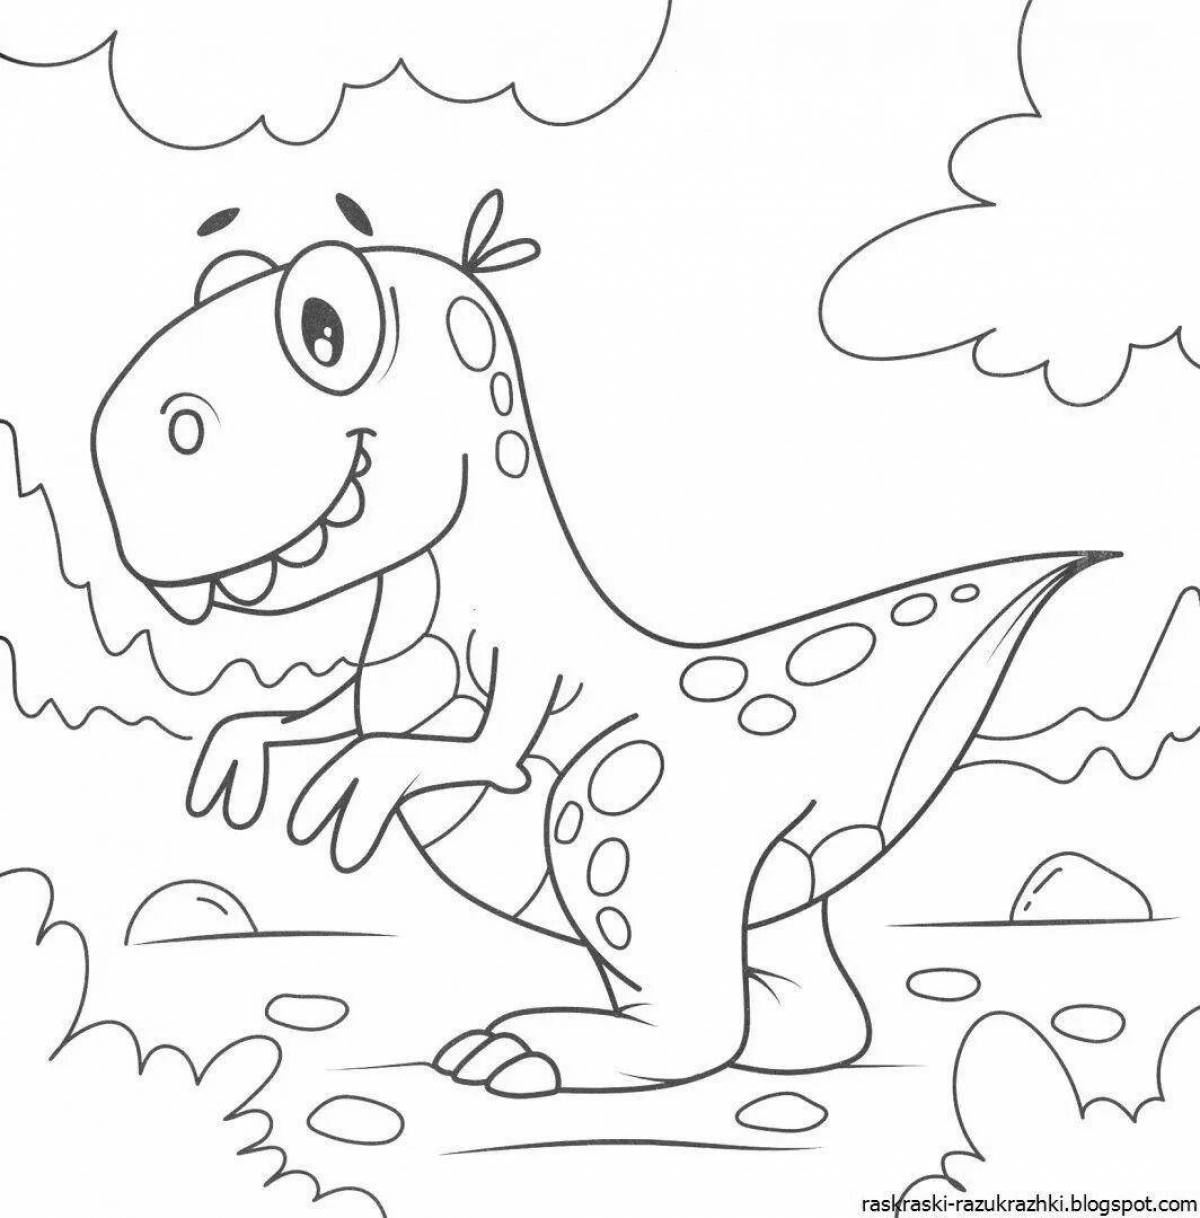 Colorful dinosaur coloring book for kids